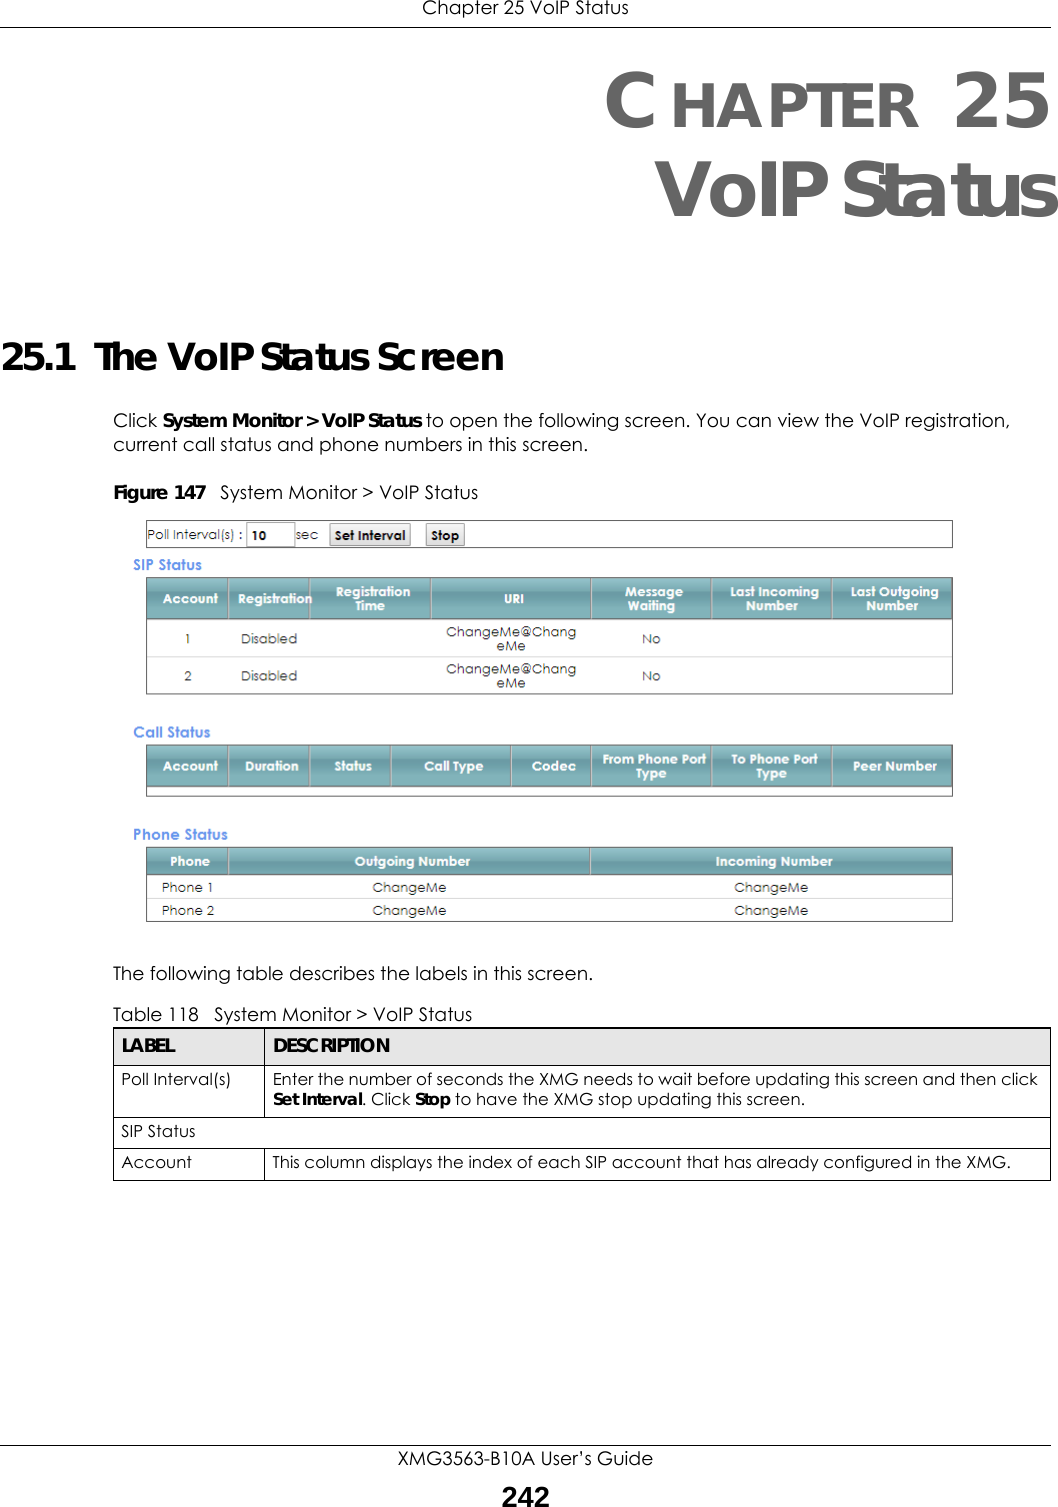 Chapter 25 VoIP StatusXMG3563-B10A User’s Guide242CHAPTER 25VoIP Status25.1  The VoIP Status ScreenClick System Monitor &gt; VoIP Status to open the following screen. You can view the VoIP registration, current call status and phone numbers in this screen.Figure 147   System Monitor &gt; VoIP StatusThe following table describes the labels in this screen. Table 118   System Monitor &gt; VoIP StatusLABEL DESCRIPTIONPoll Interval(s) Enter the number of seconds the XMG needs to wait before updating this screen and then click Set Interval. Click Stop to have the XMG stop updating this screen.SIP StatusAccount This column displays the index of each SIP account that has already configured in the XMG.